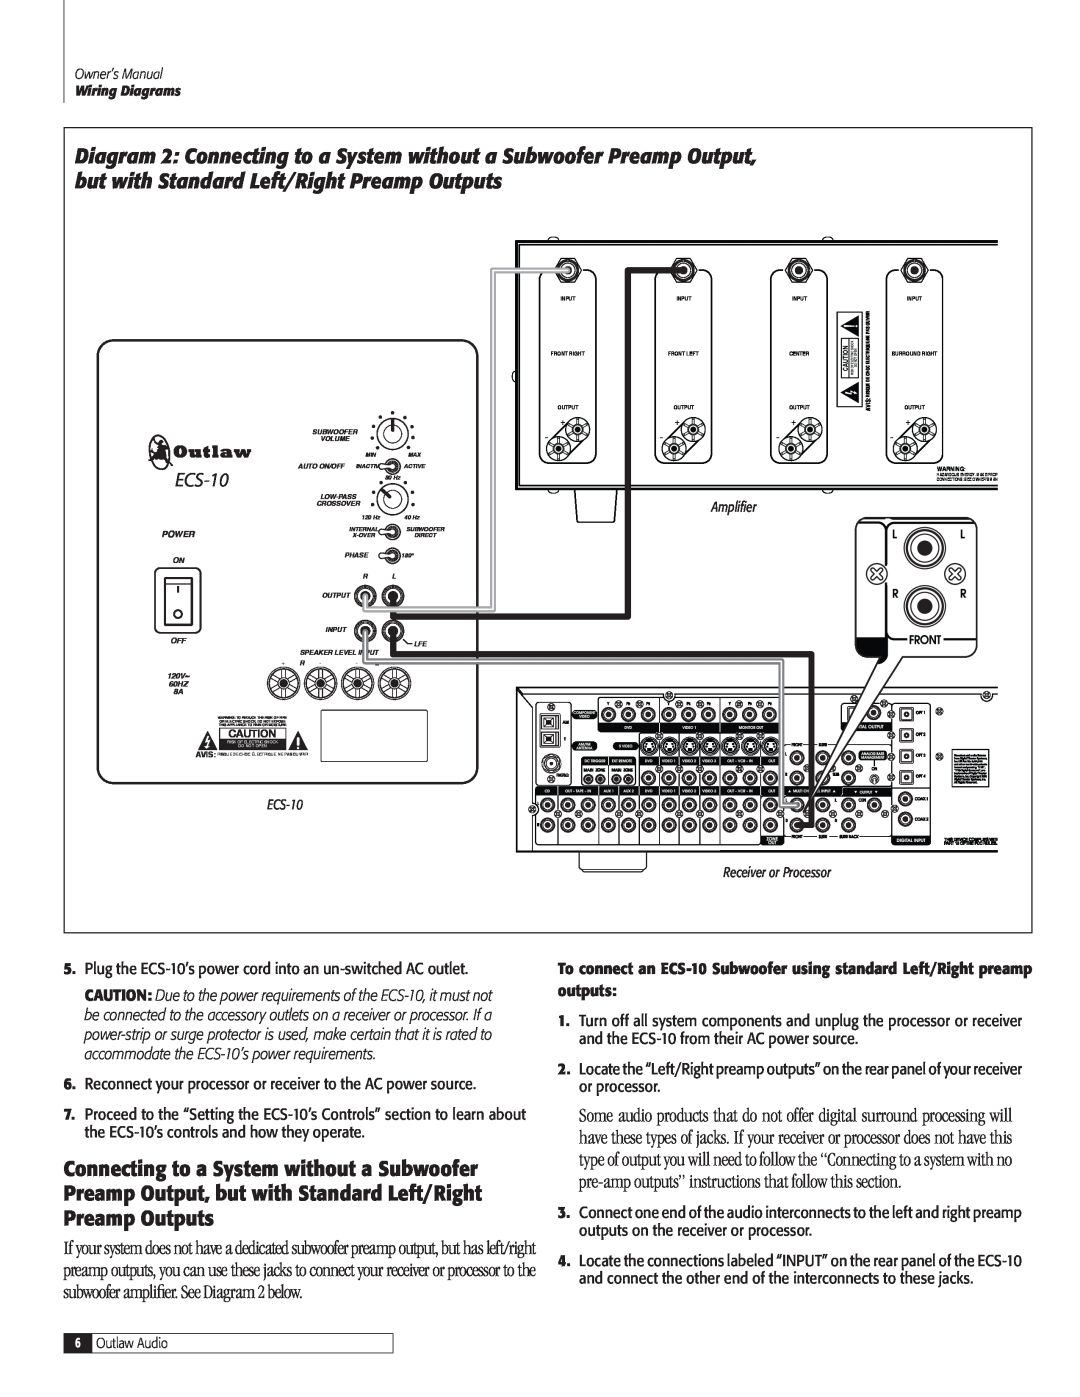 Outlaw Audio ECS-10 owner manual Wiring Diagrams 